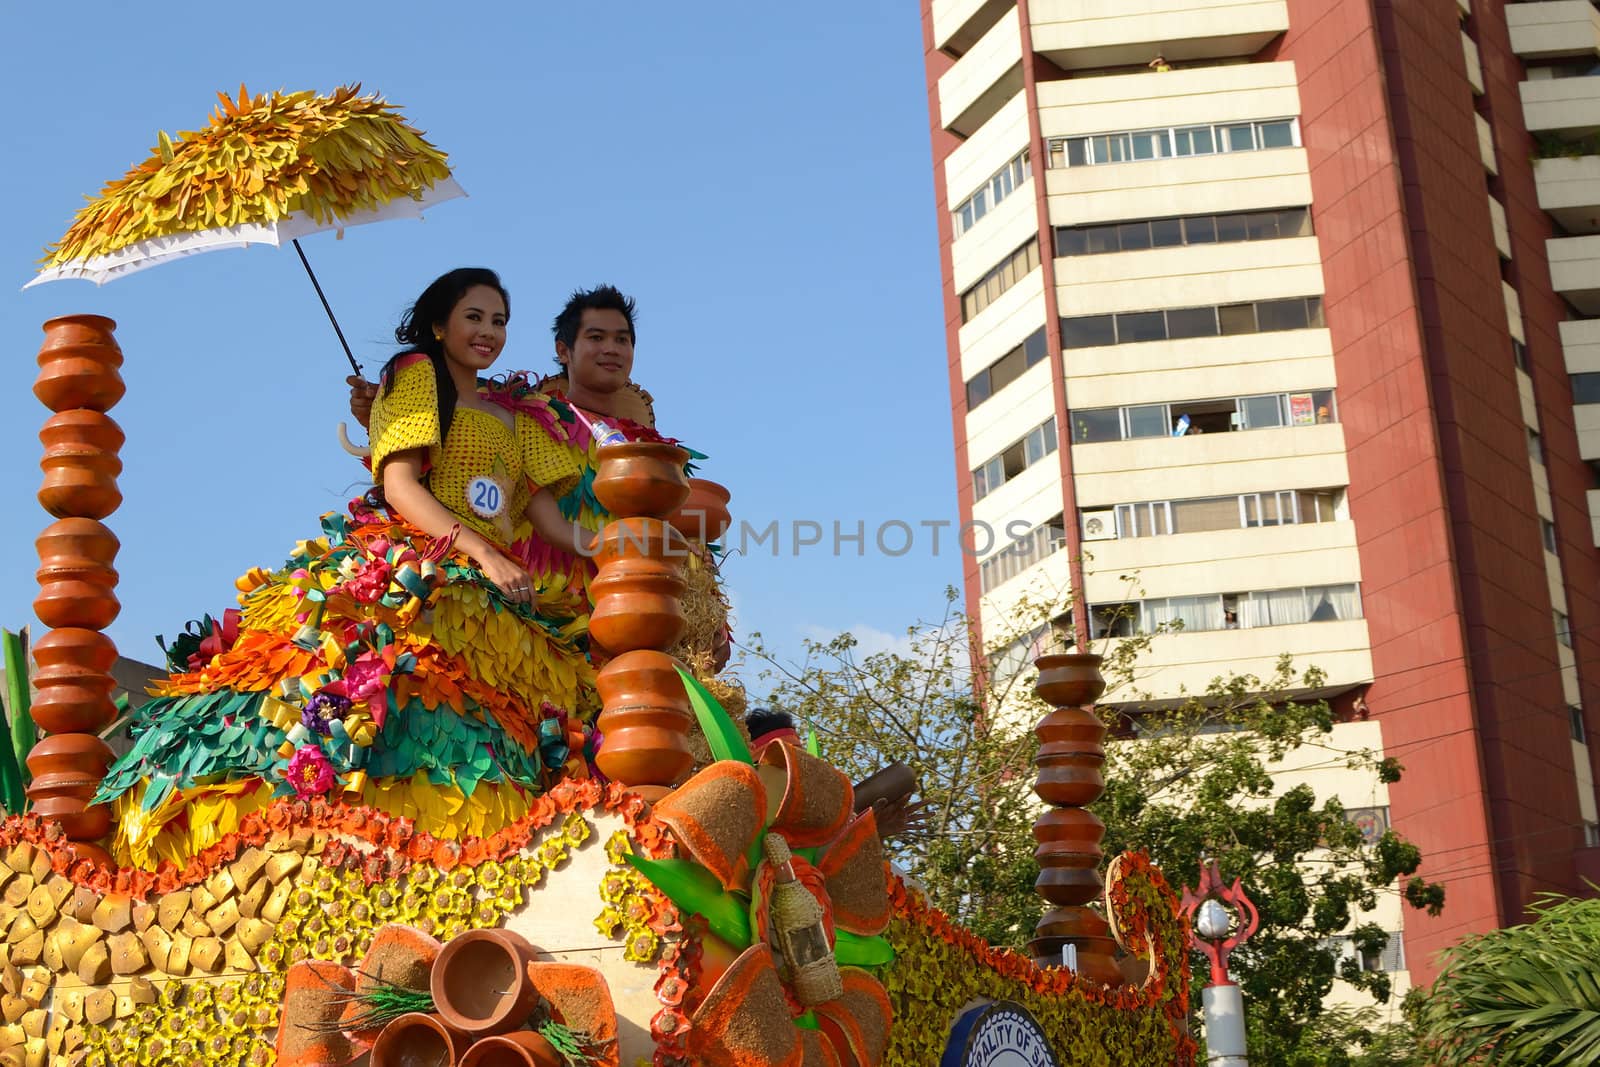 MANILA, PHILIPPINES - APR. 14: pageant contestants in their cultural dress pauses during Aliwan Fiesta, which is the biggest annual national festival competition on April 14, 2012 in Manila Philippines.